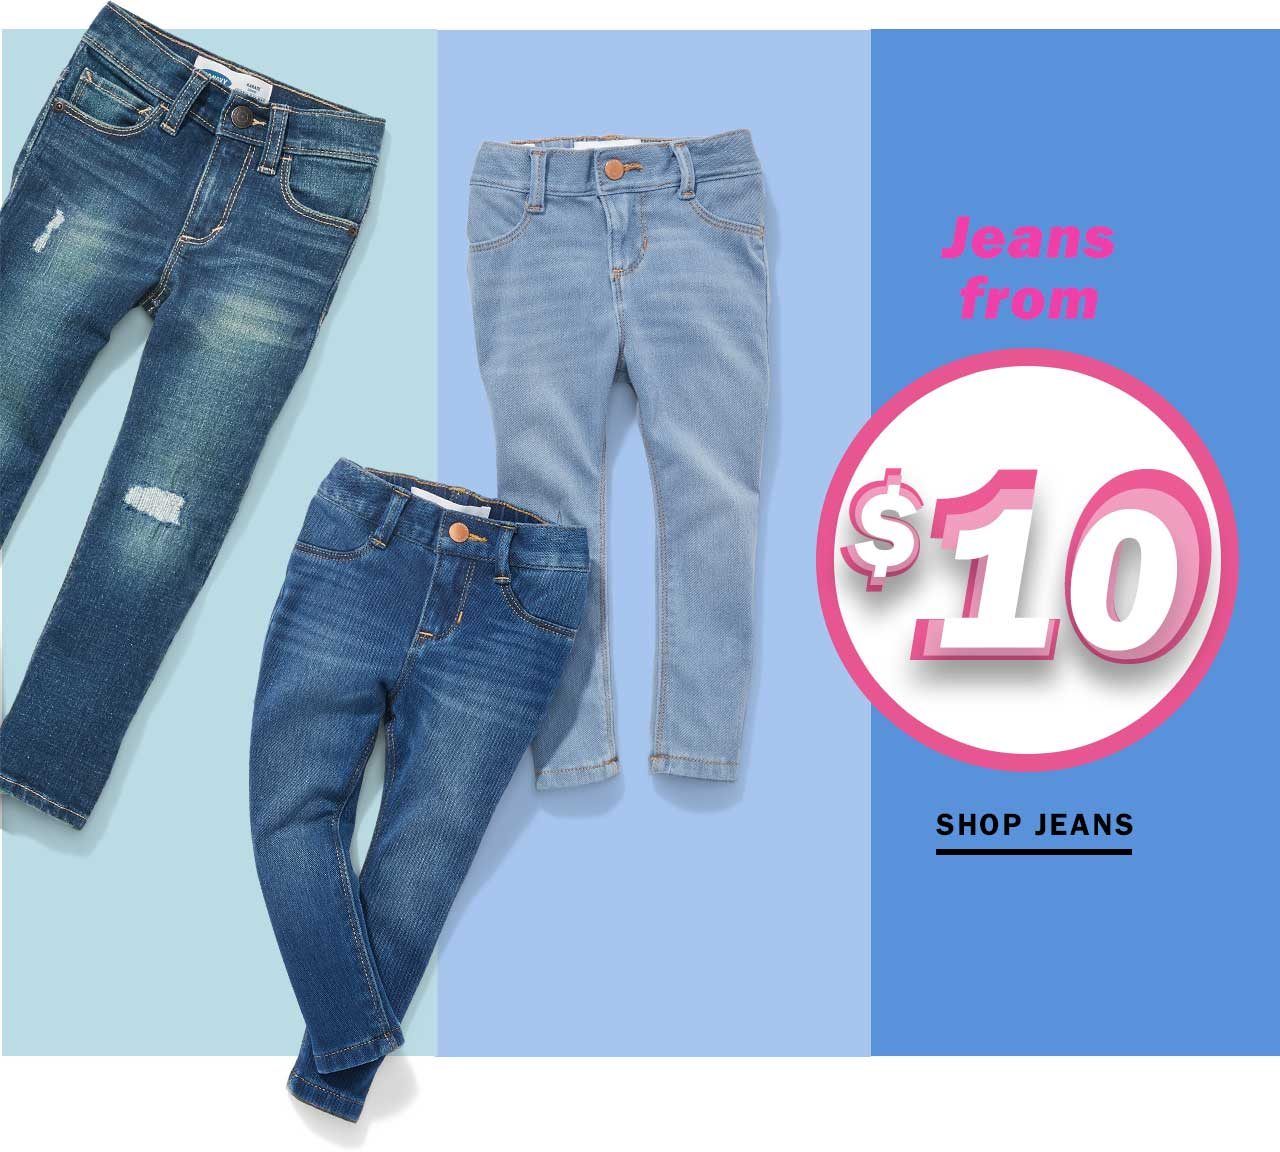 Jeans from $10